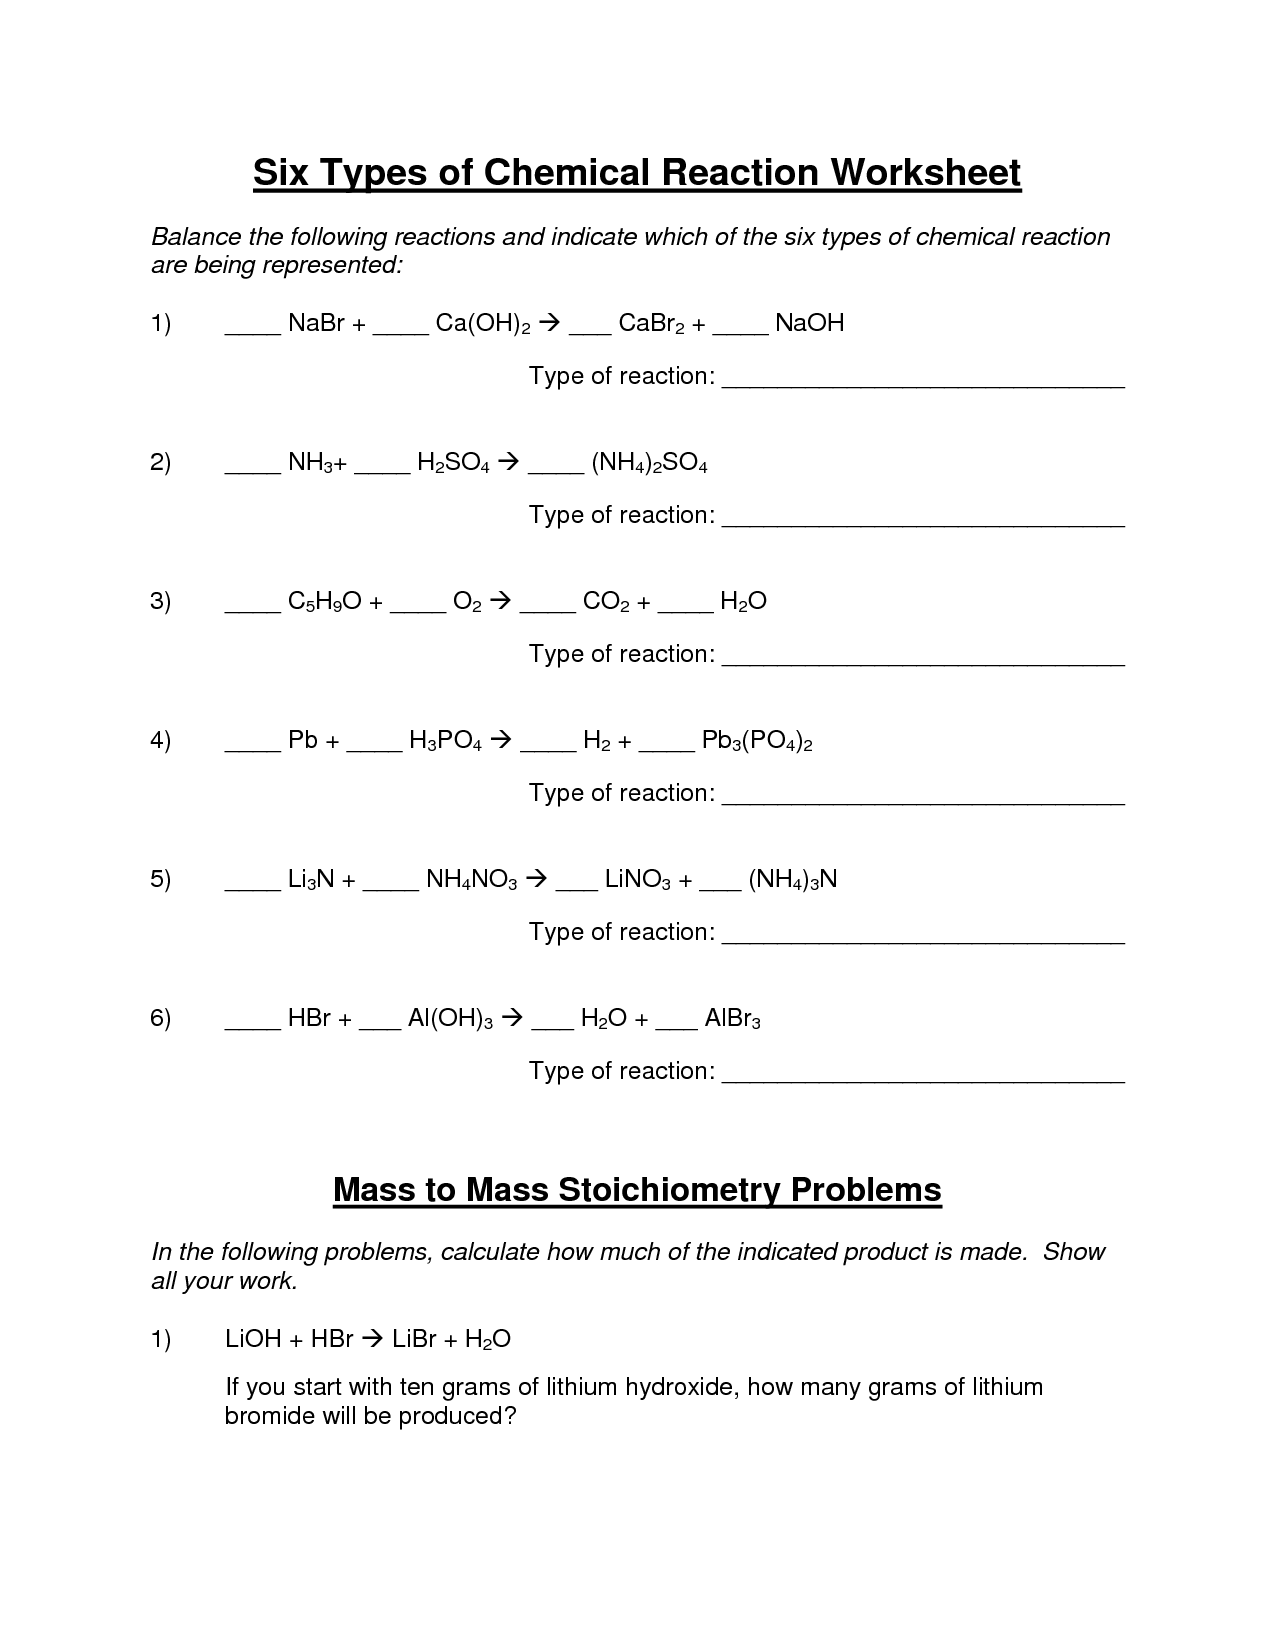 Identifying Chemical Reaction Types Worksheet Answers